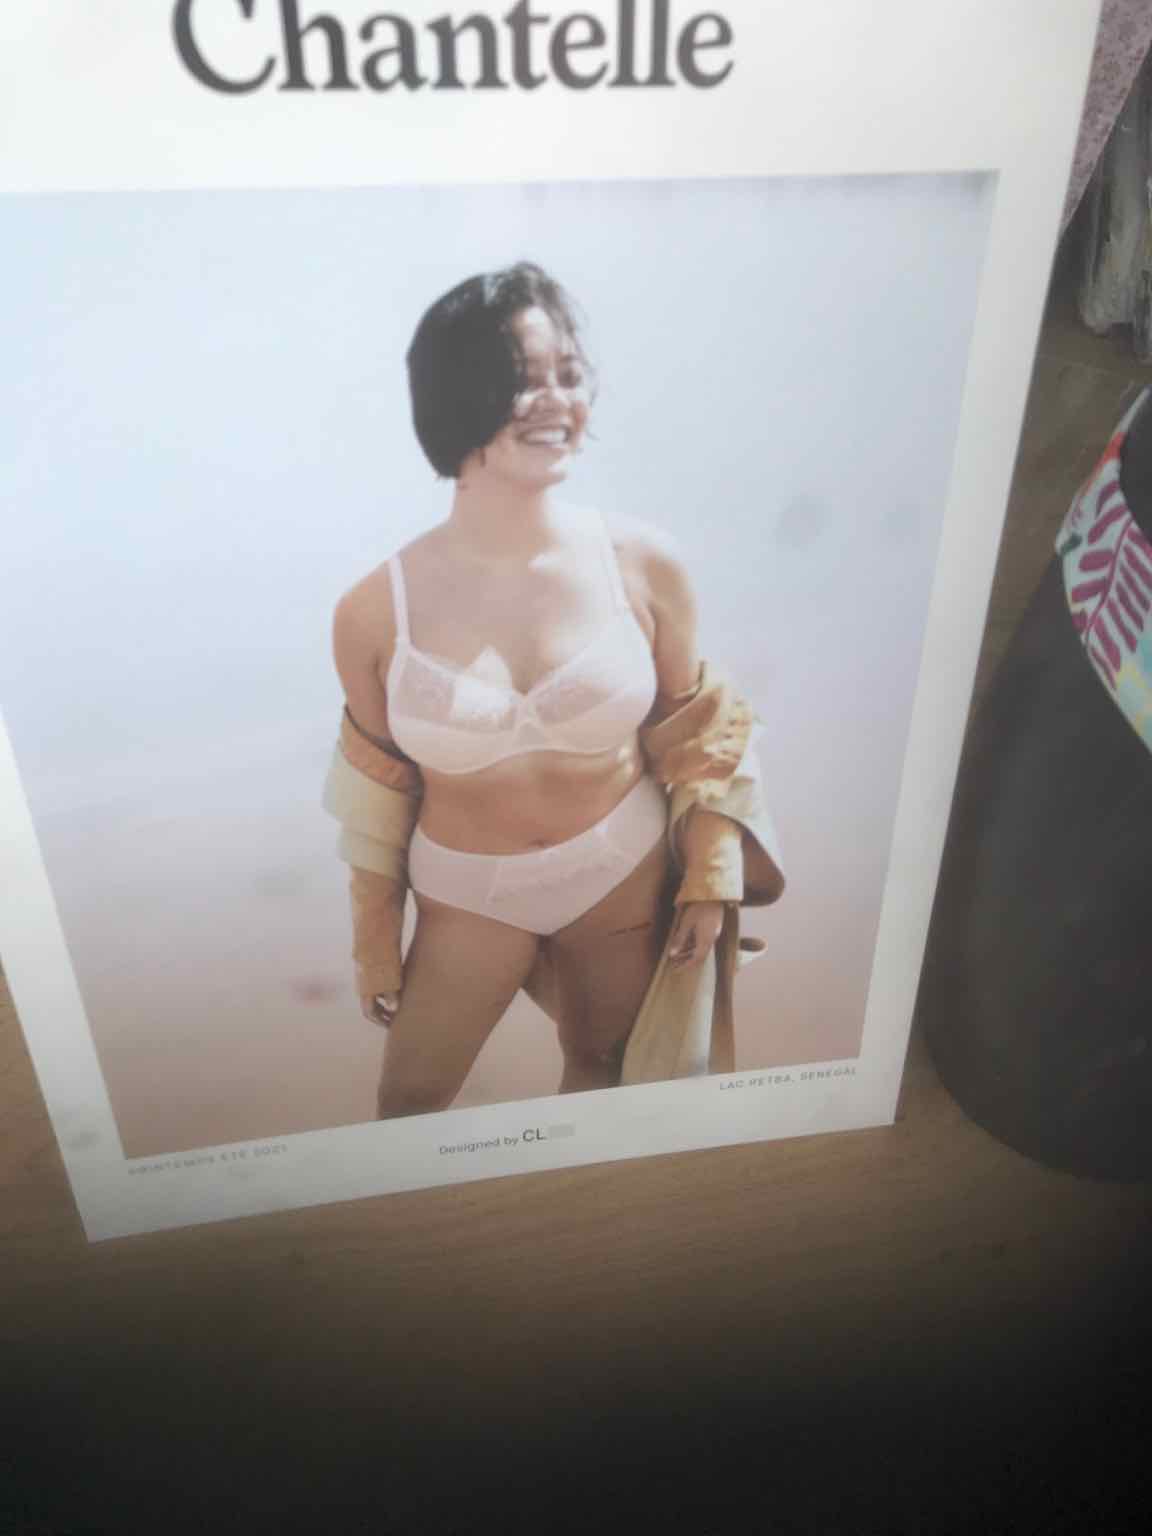 poster in shop window advertising French lingerie